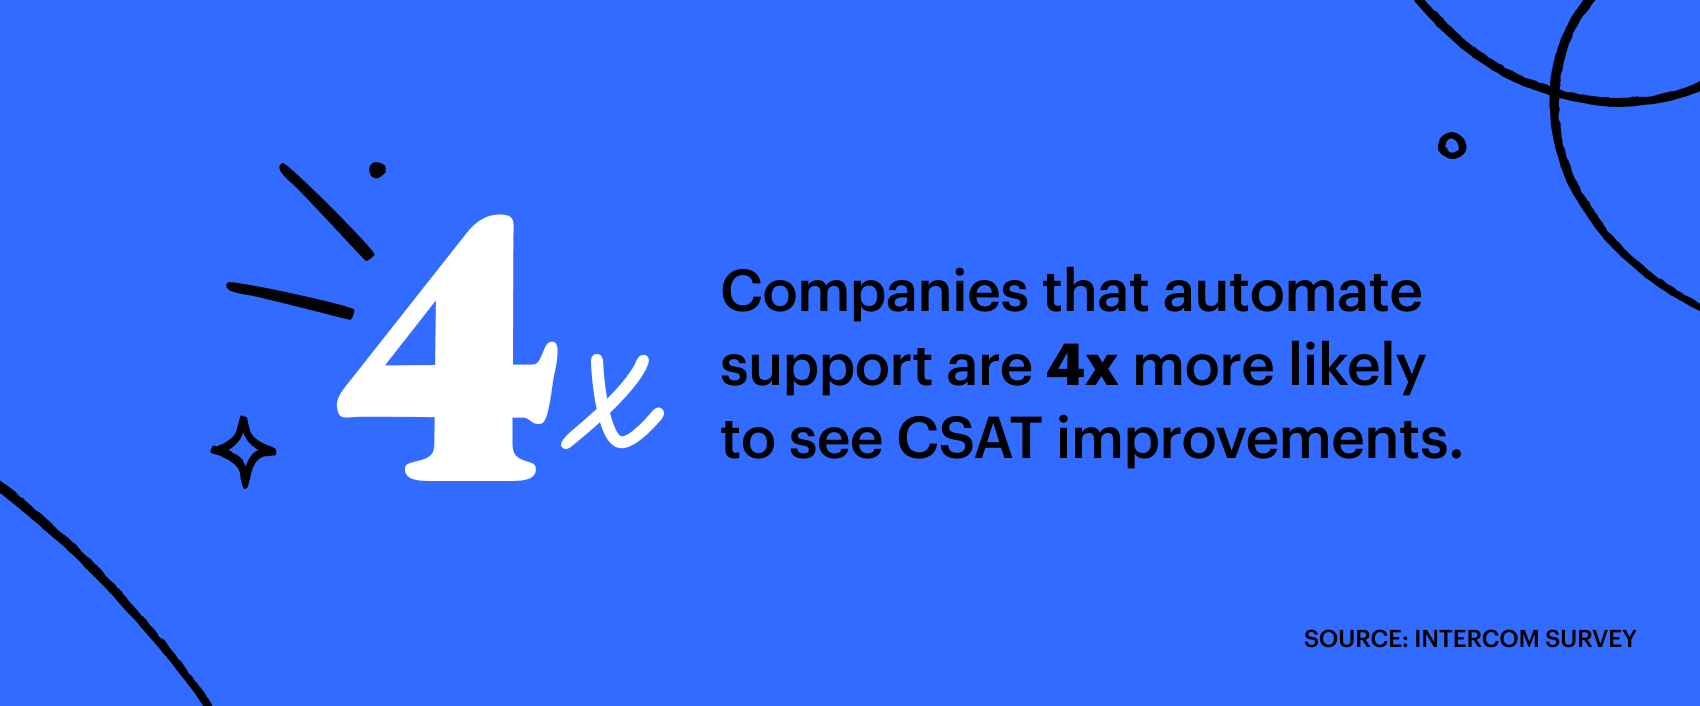 Companies that automate support are 4x more likely to see CSAT improvements. Source: Intercom survey